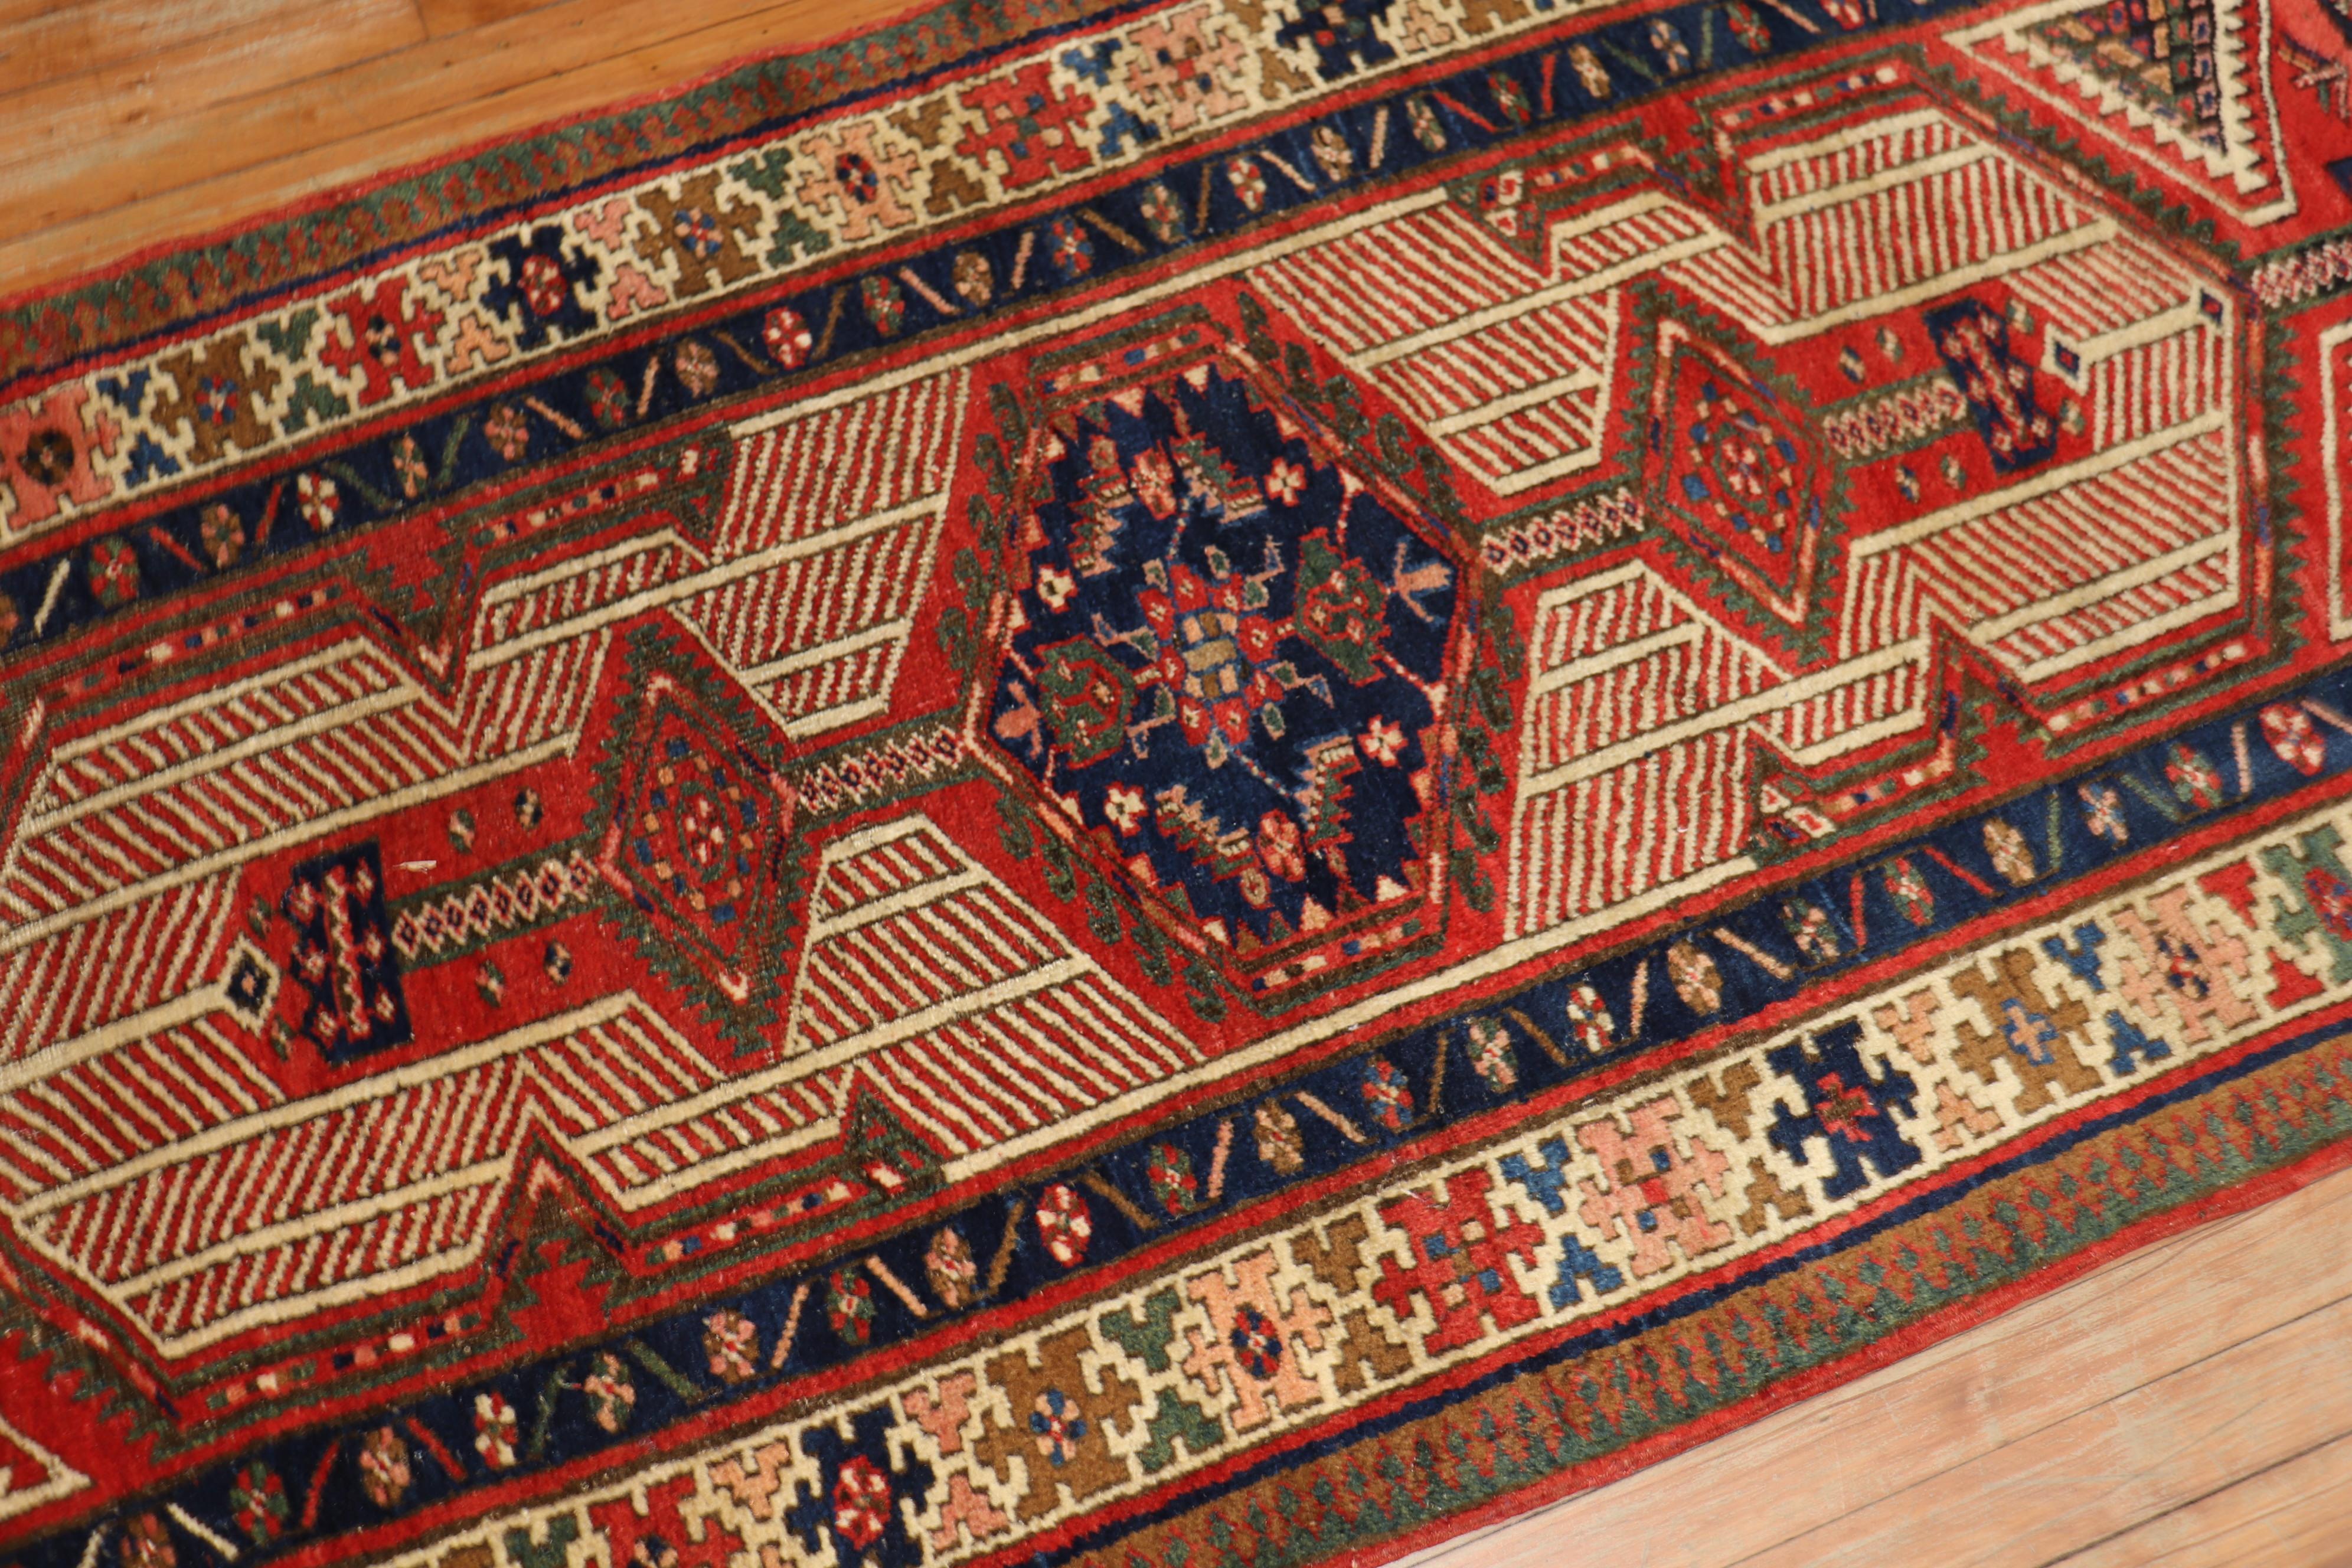 A 20th century tribal highly decorative Persian Serab wide runner. Great quality and great condition. Accents in blue brown red and green on camel brown tone ground

Measures: 3'4